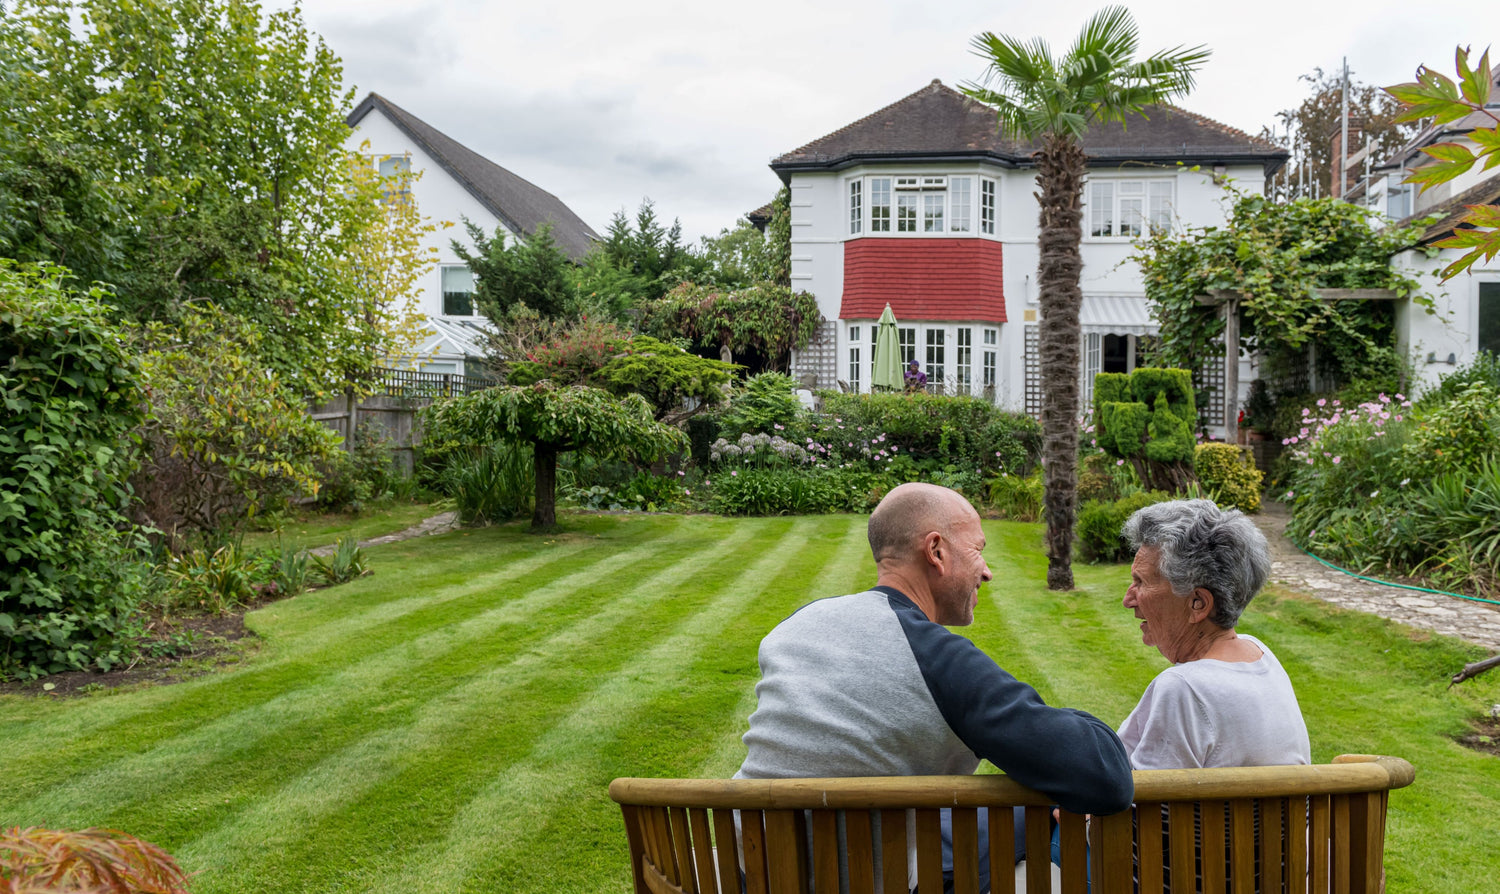 Man and woman talking on a bench in front of garden